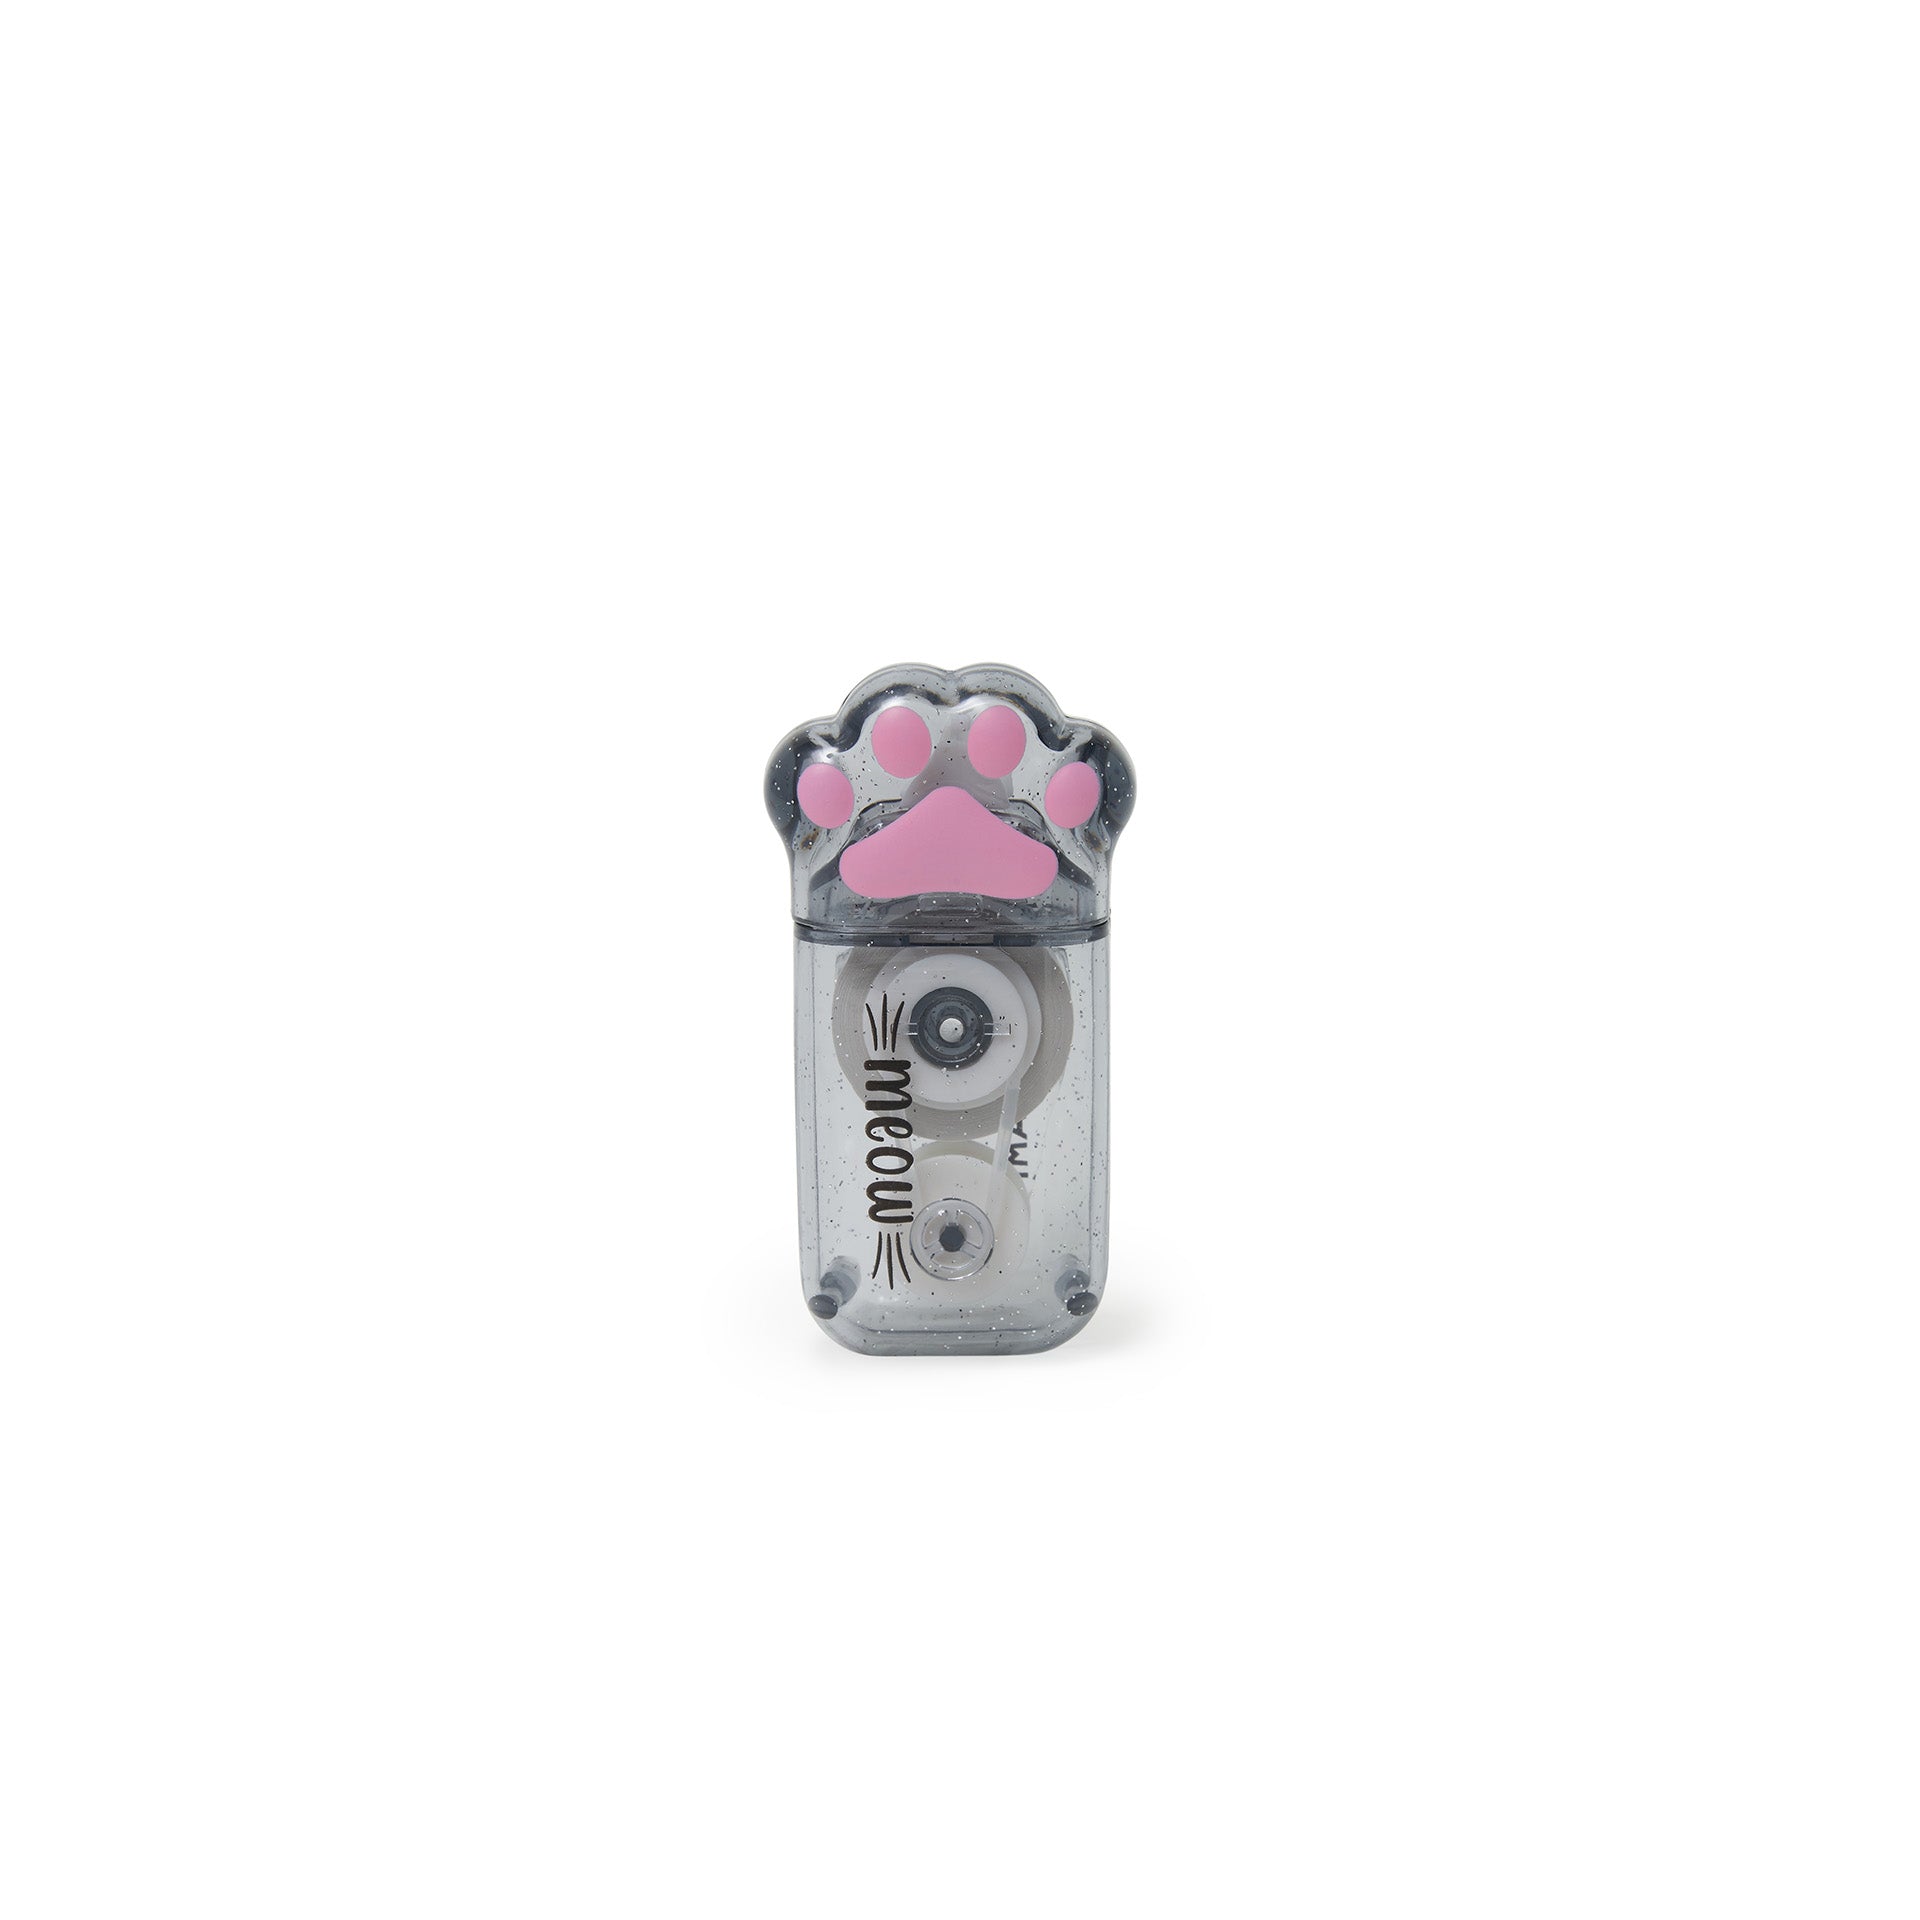 Correction tape in a case in the shape of a grey cats leg and paw. The dispenser is a grey glittery transparent style and the paw is pink.